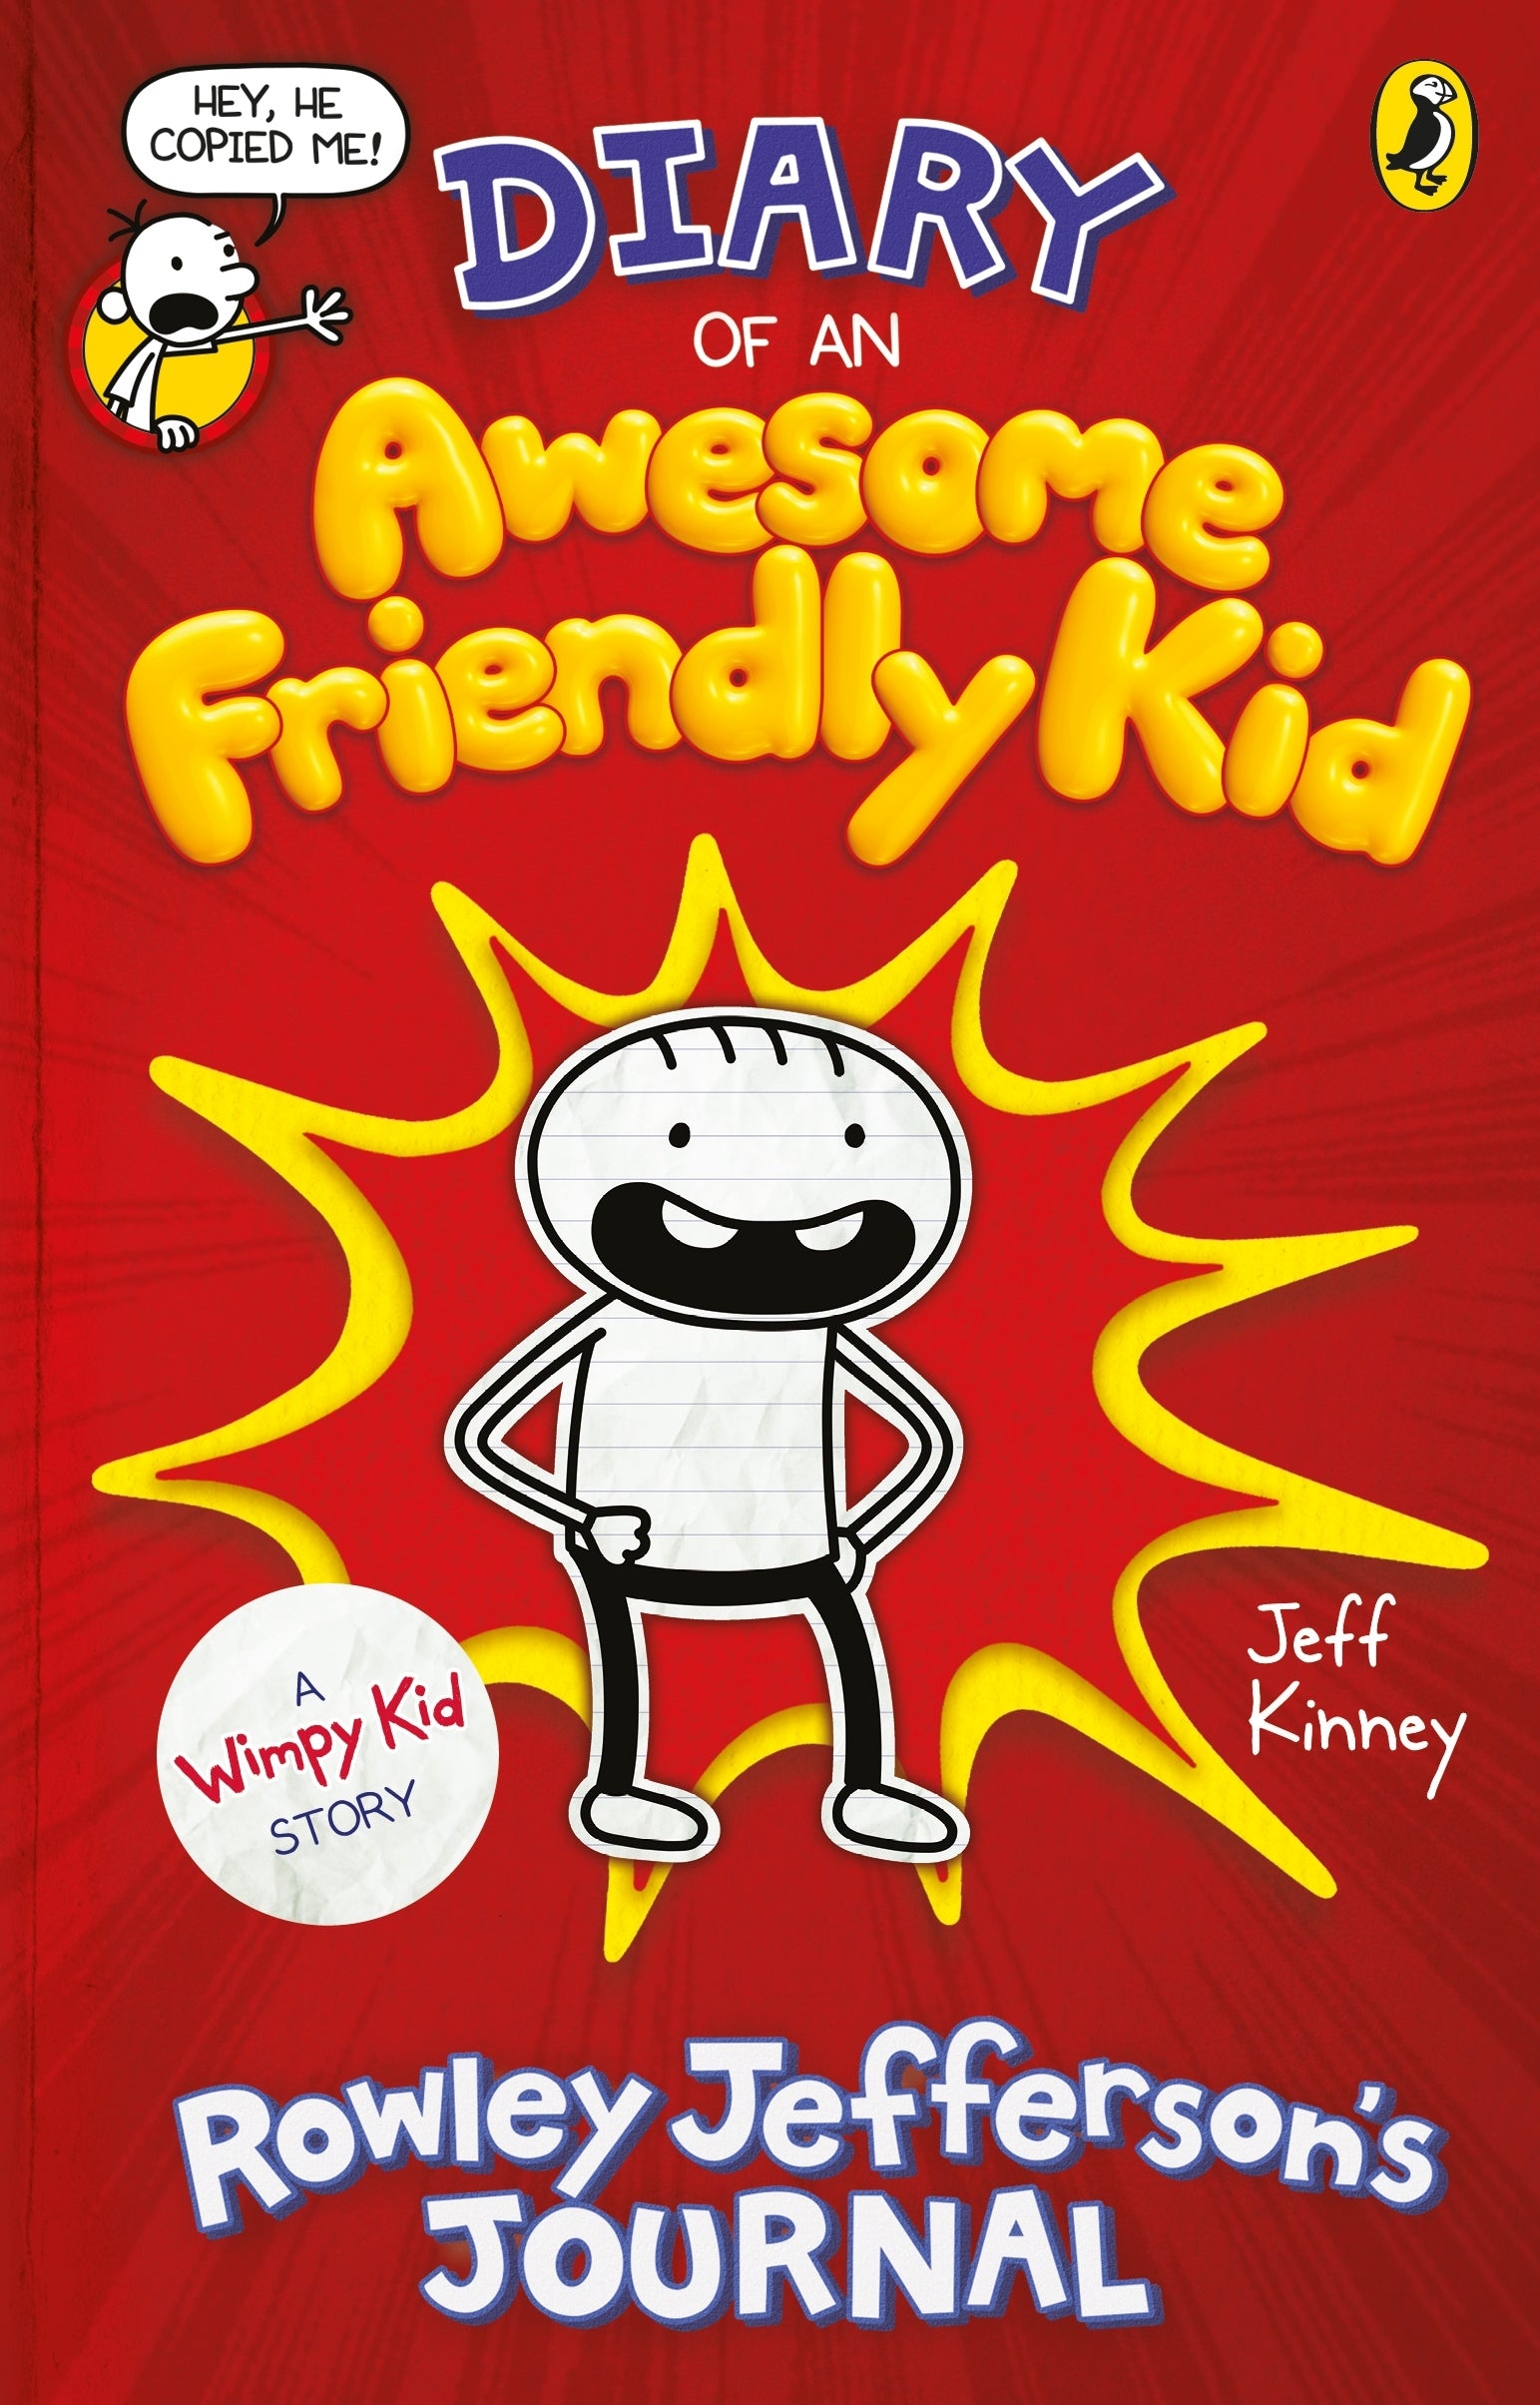 A Wimpy Kid Story : Diary of an Awesome Friendly Kid